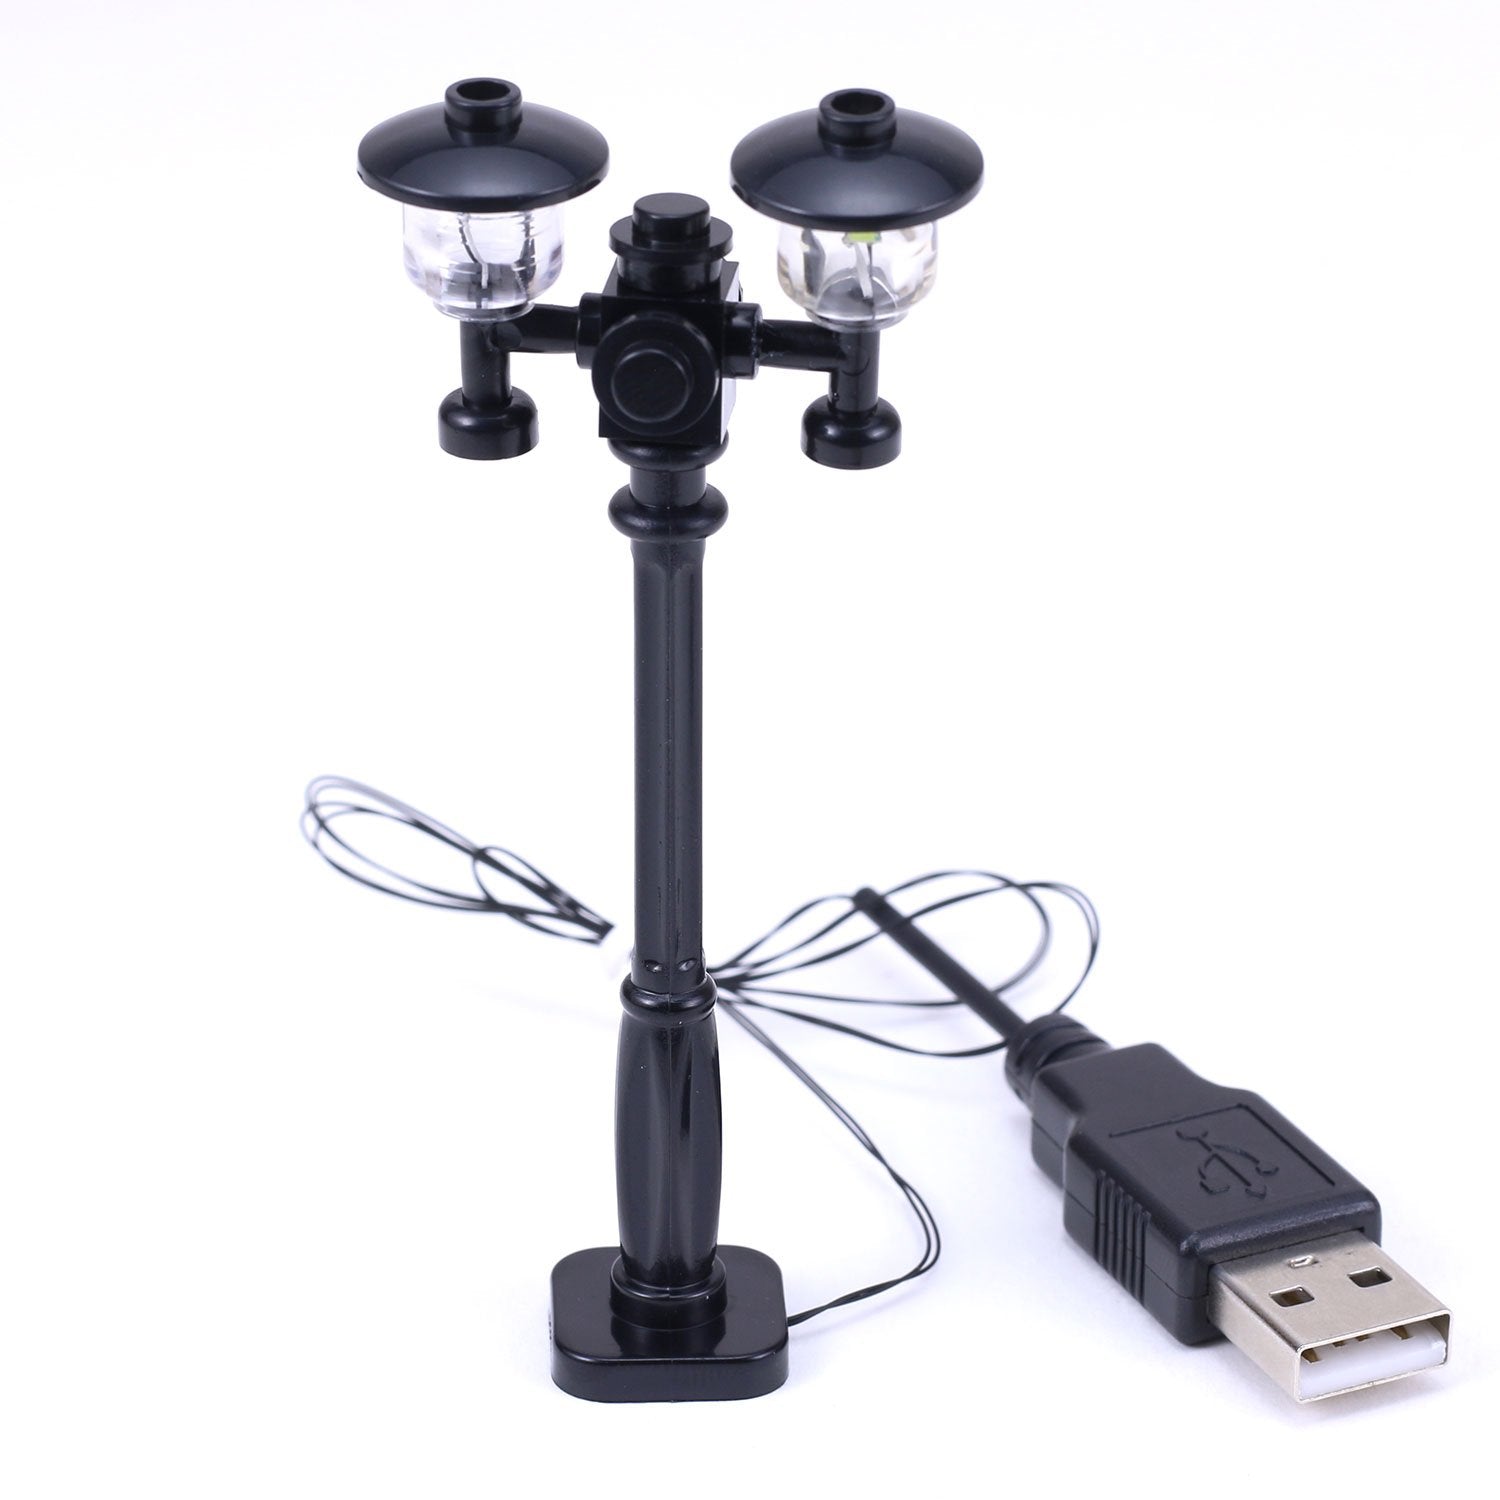 Black Double Light-Up Minifig Scale Lamp Post (Cold/White Light) - LEGO Compatible